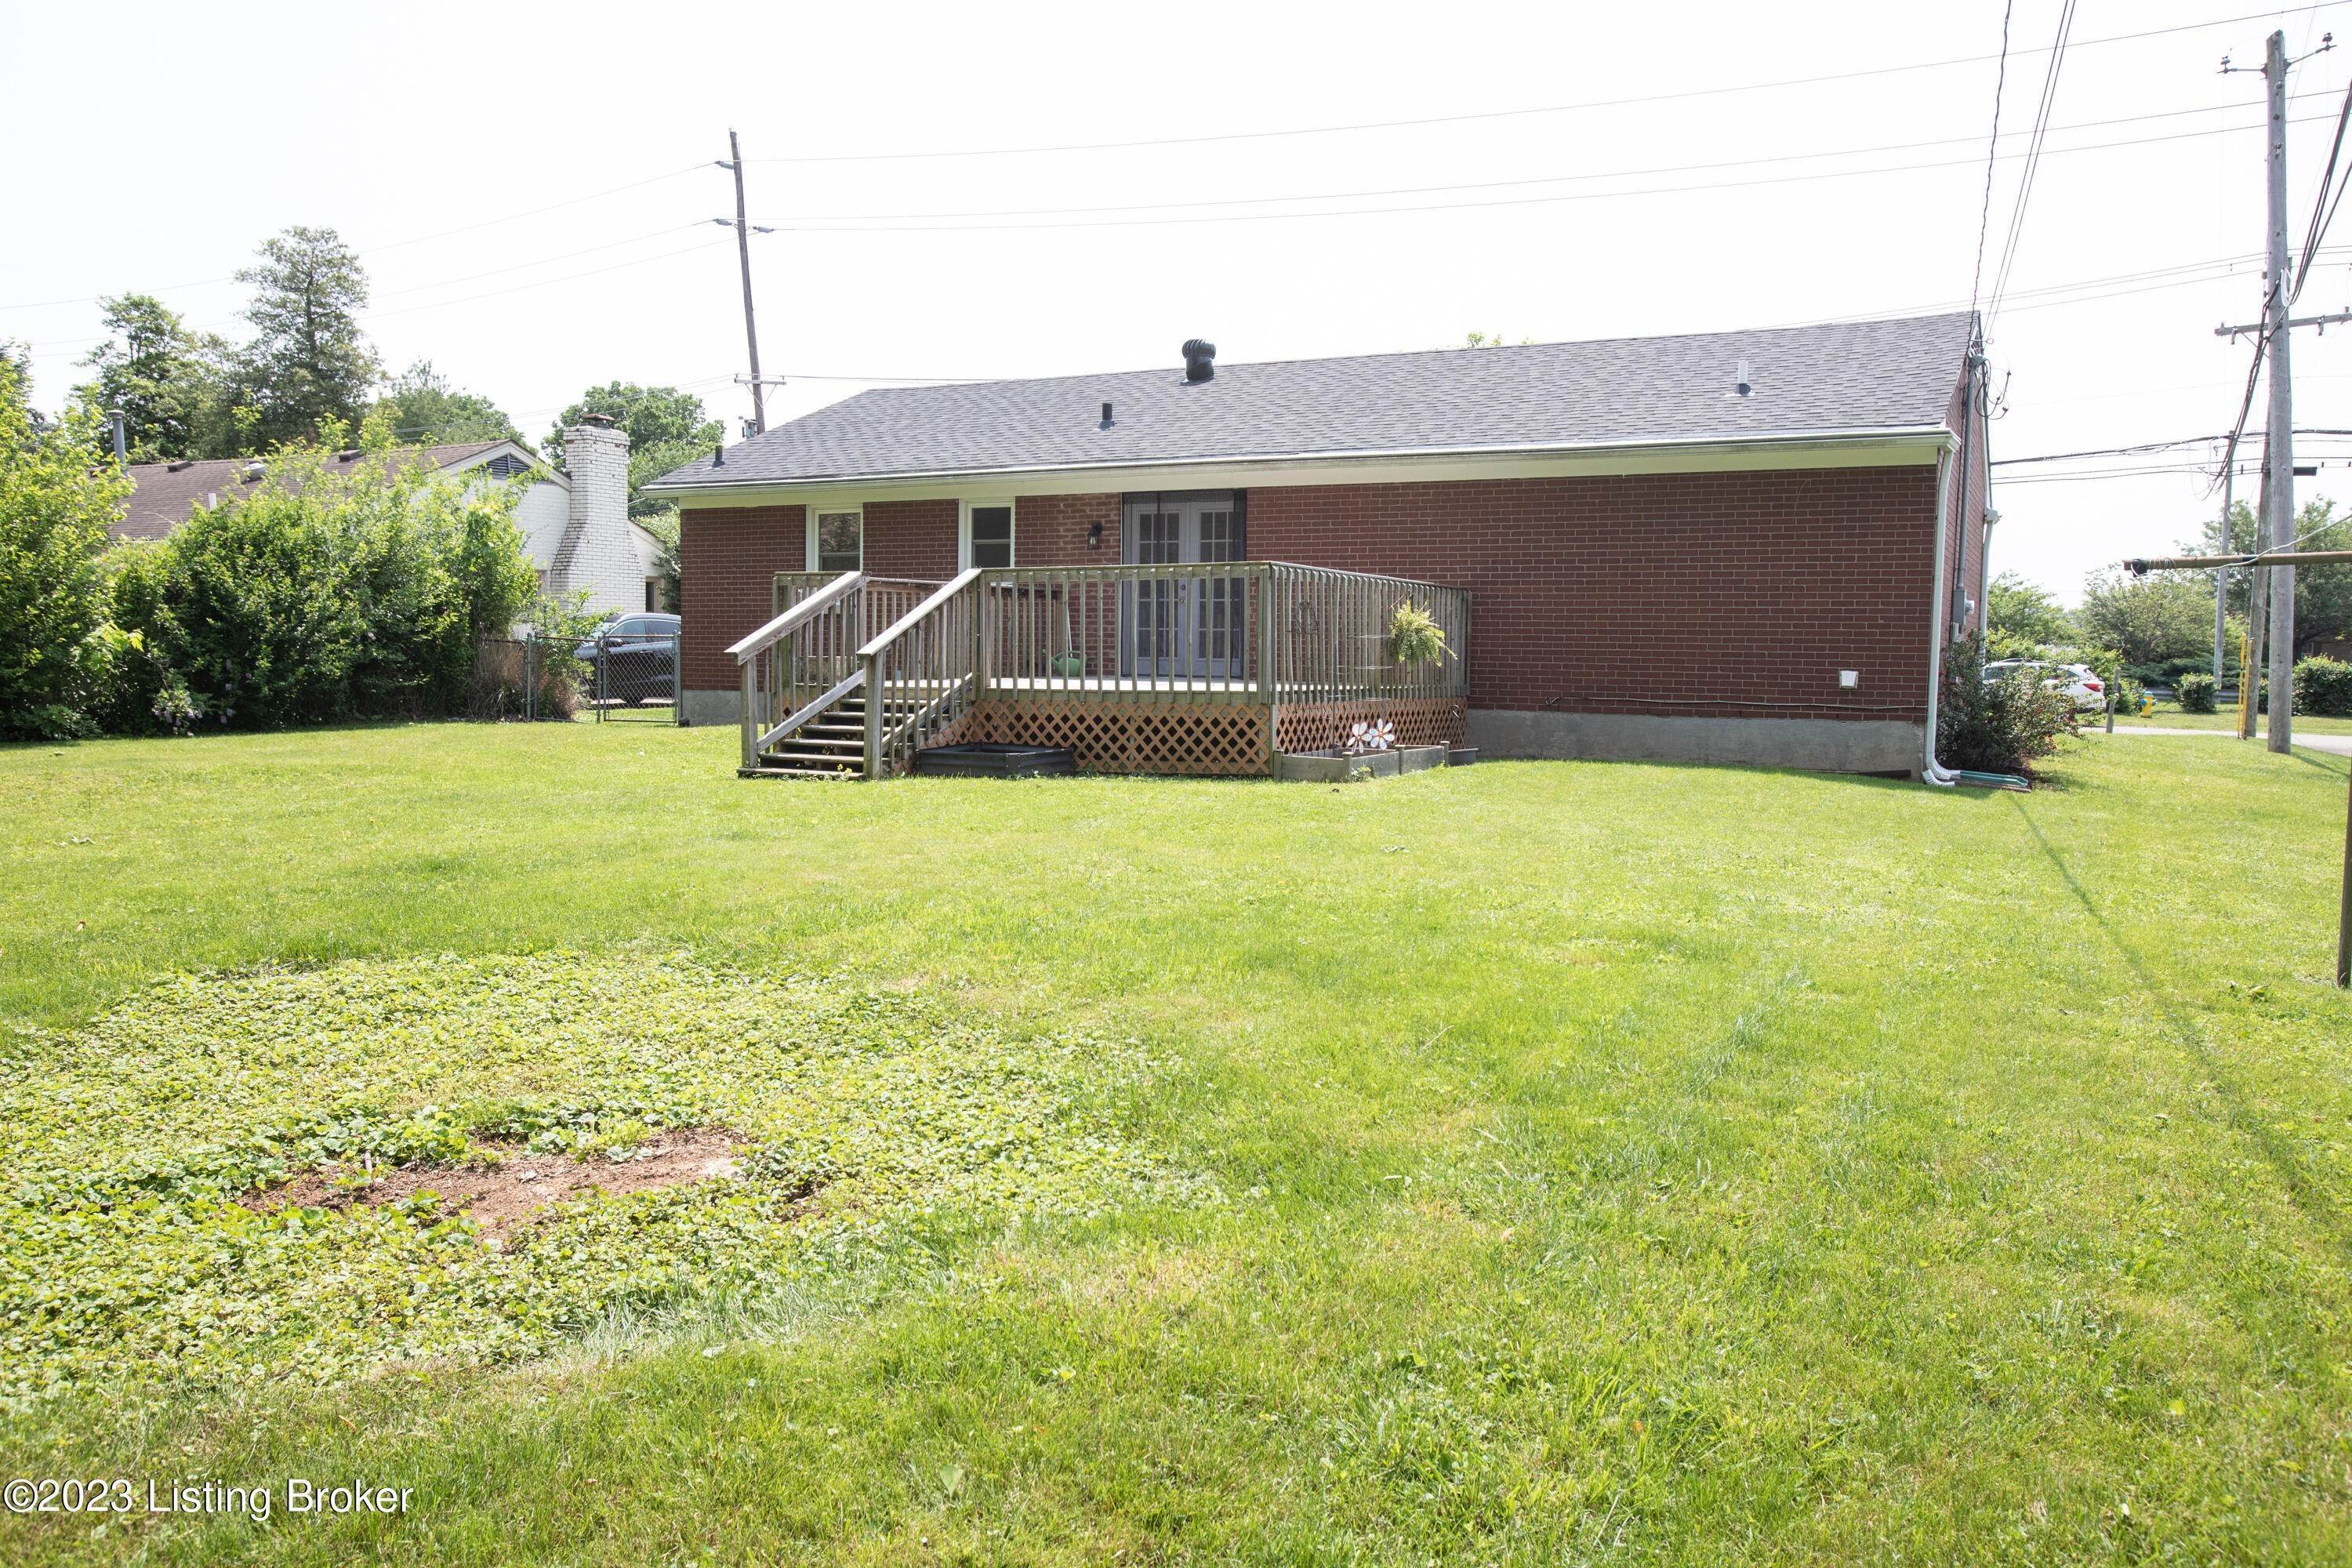 35. Single Family at Louisville, KY 40223